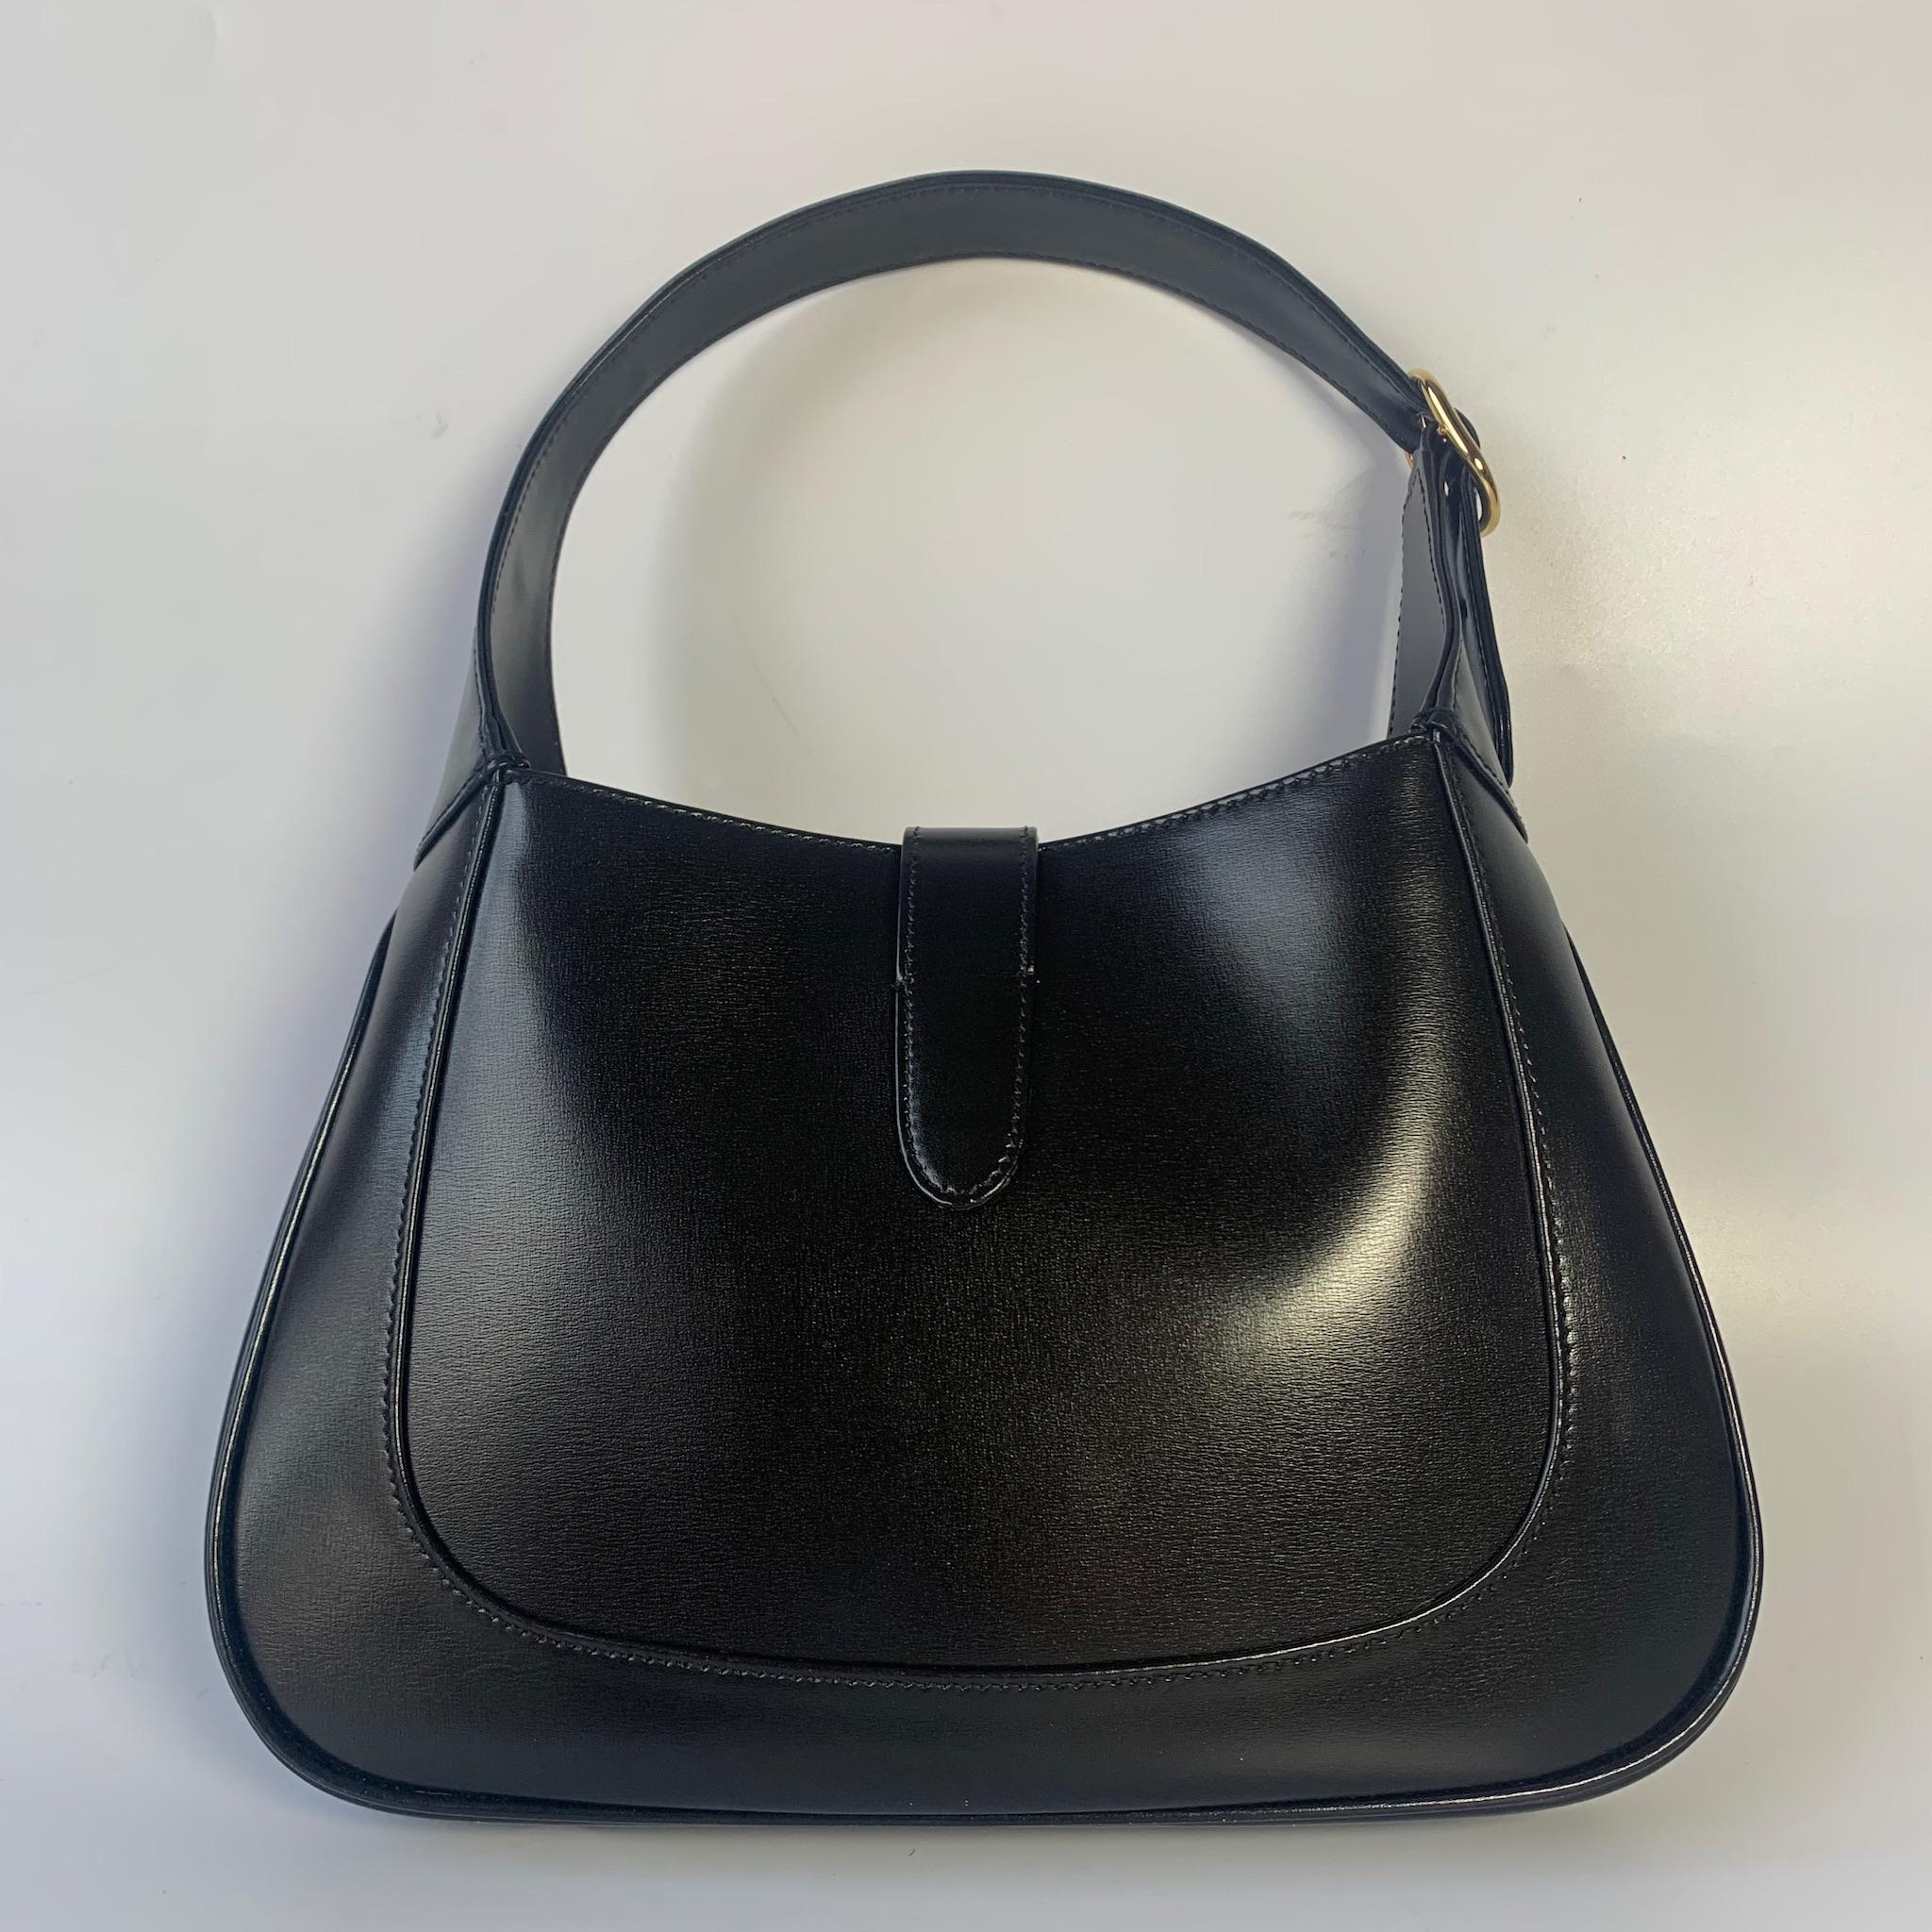 The Gucci Jackie 1961 Black Small bag is a modern take on an iconic design. Crafted in leather with a structured silhouette, it features a crossbody strap so you can bring your essentials wherever life takes you. 

Size small. The middle of all